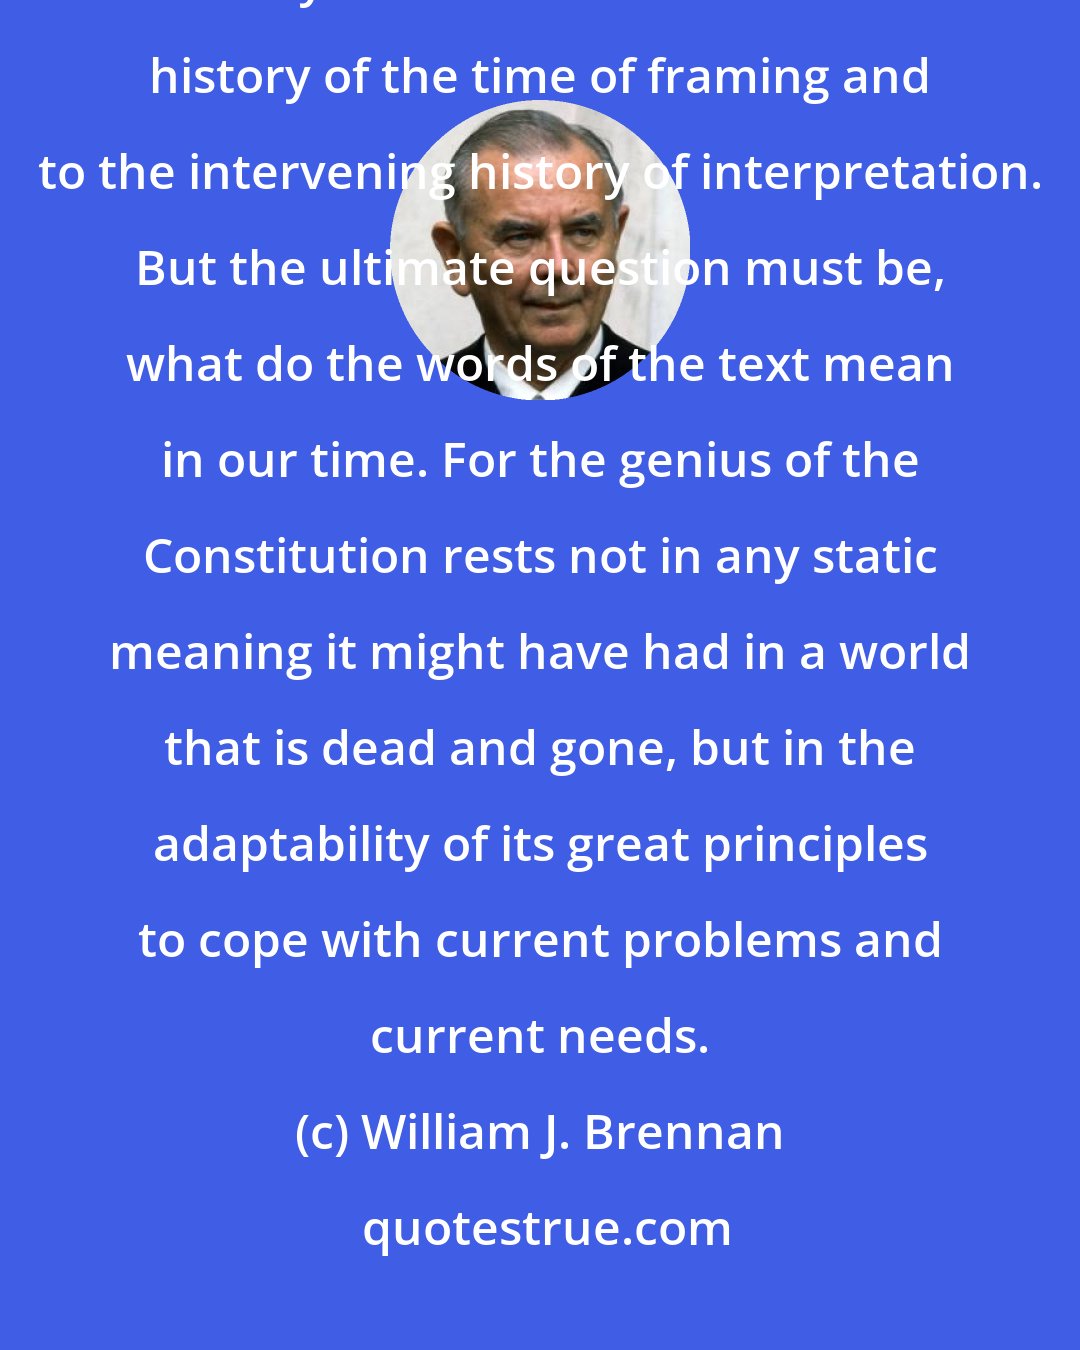 William J. Brennan: We current Justices read the Constitution in the only way that we can: as Twentieth Century Americans. We look to the history of the time of framing and to the intervening history of interpretation. But the ultimate question must be, what do the words of the text mean in our time. For the genius of the Constitution rests not in any static meaning it might have had in a world that is dead and gone, but in the adaptability of its great principles to cope with current problems and current needs.